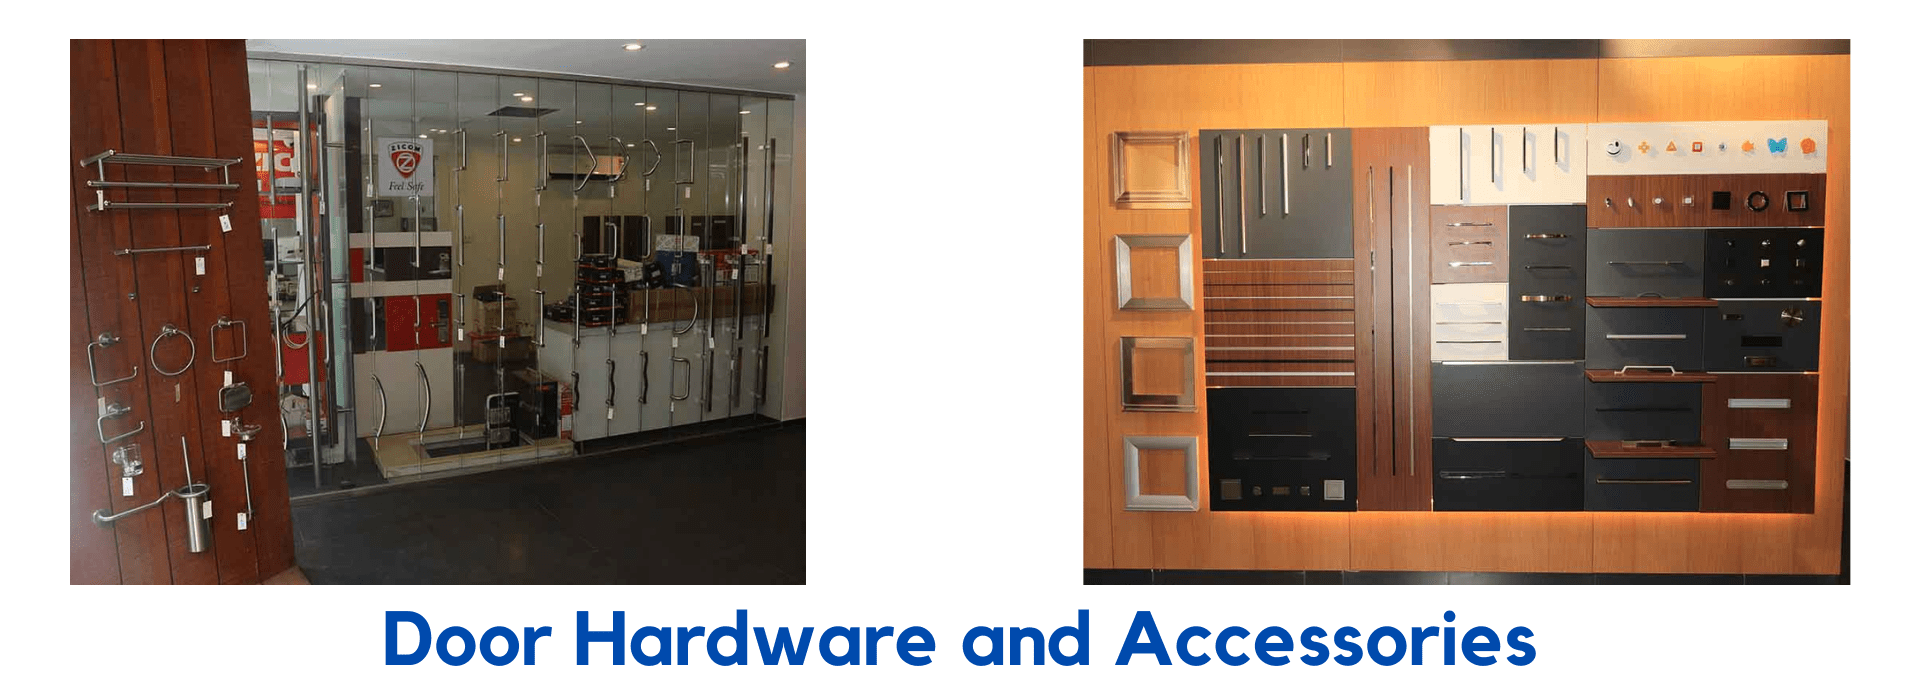 How Door Hardware and Accessories Affect Your Safety and Style